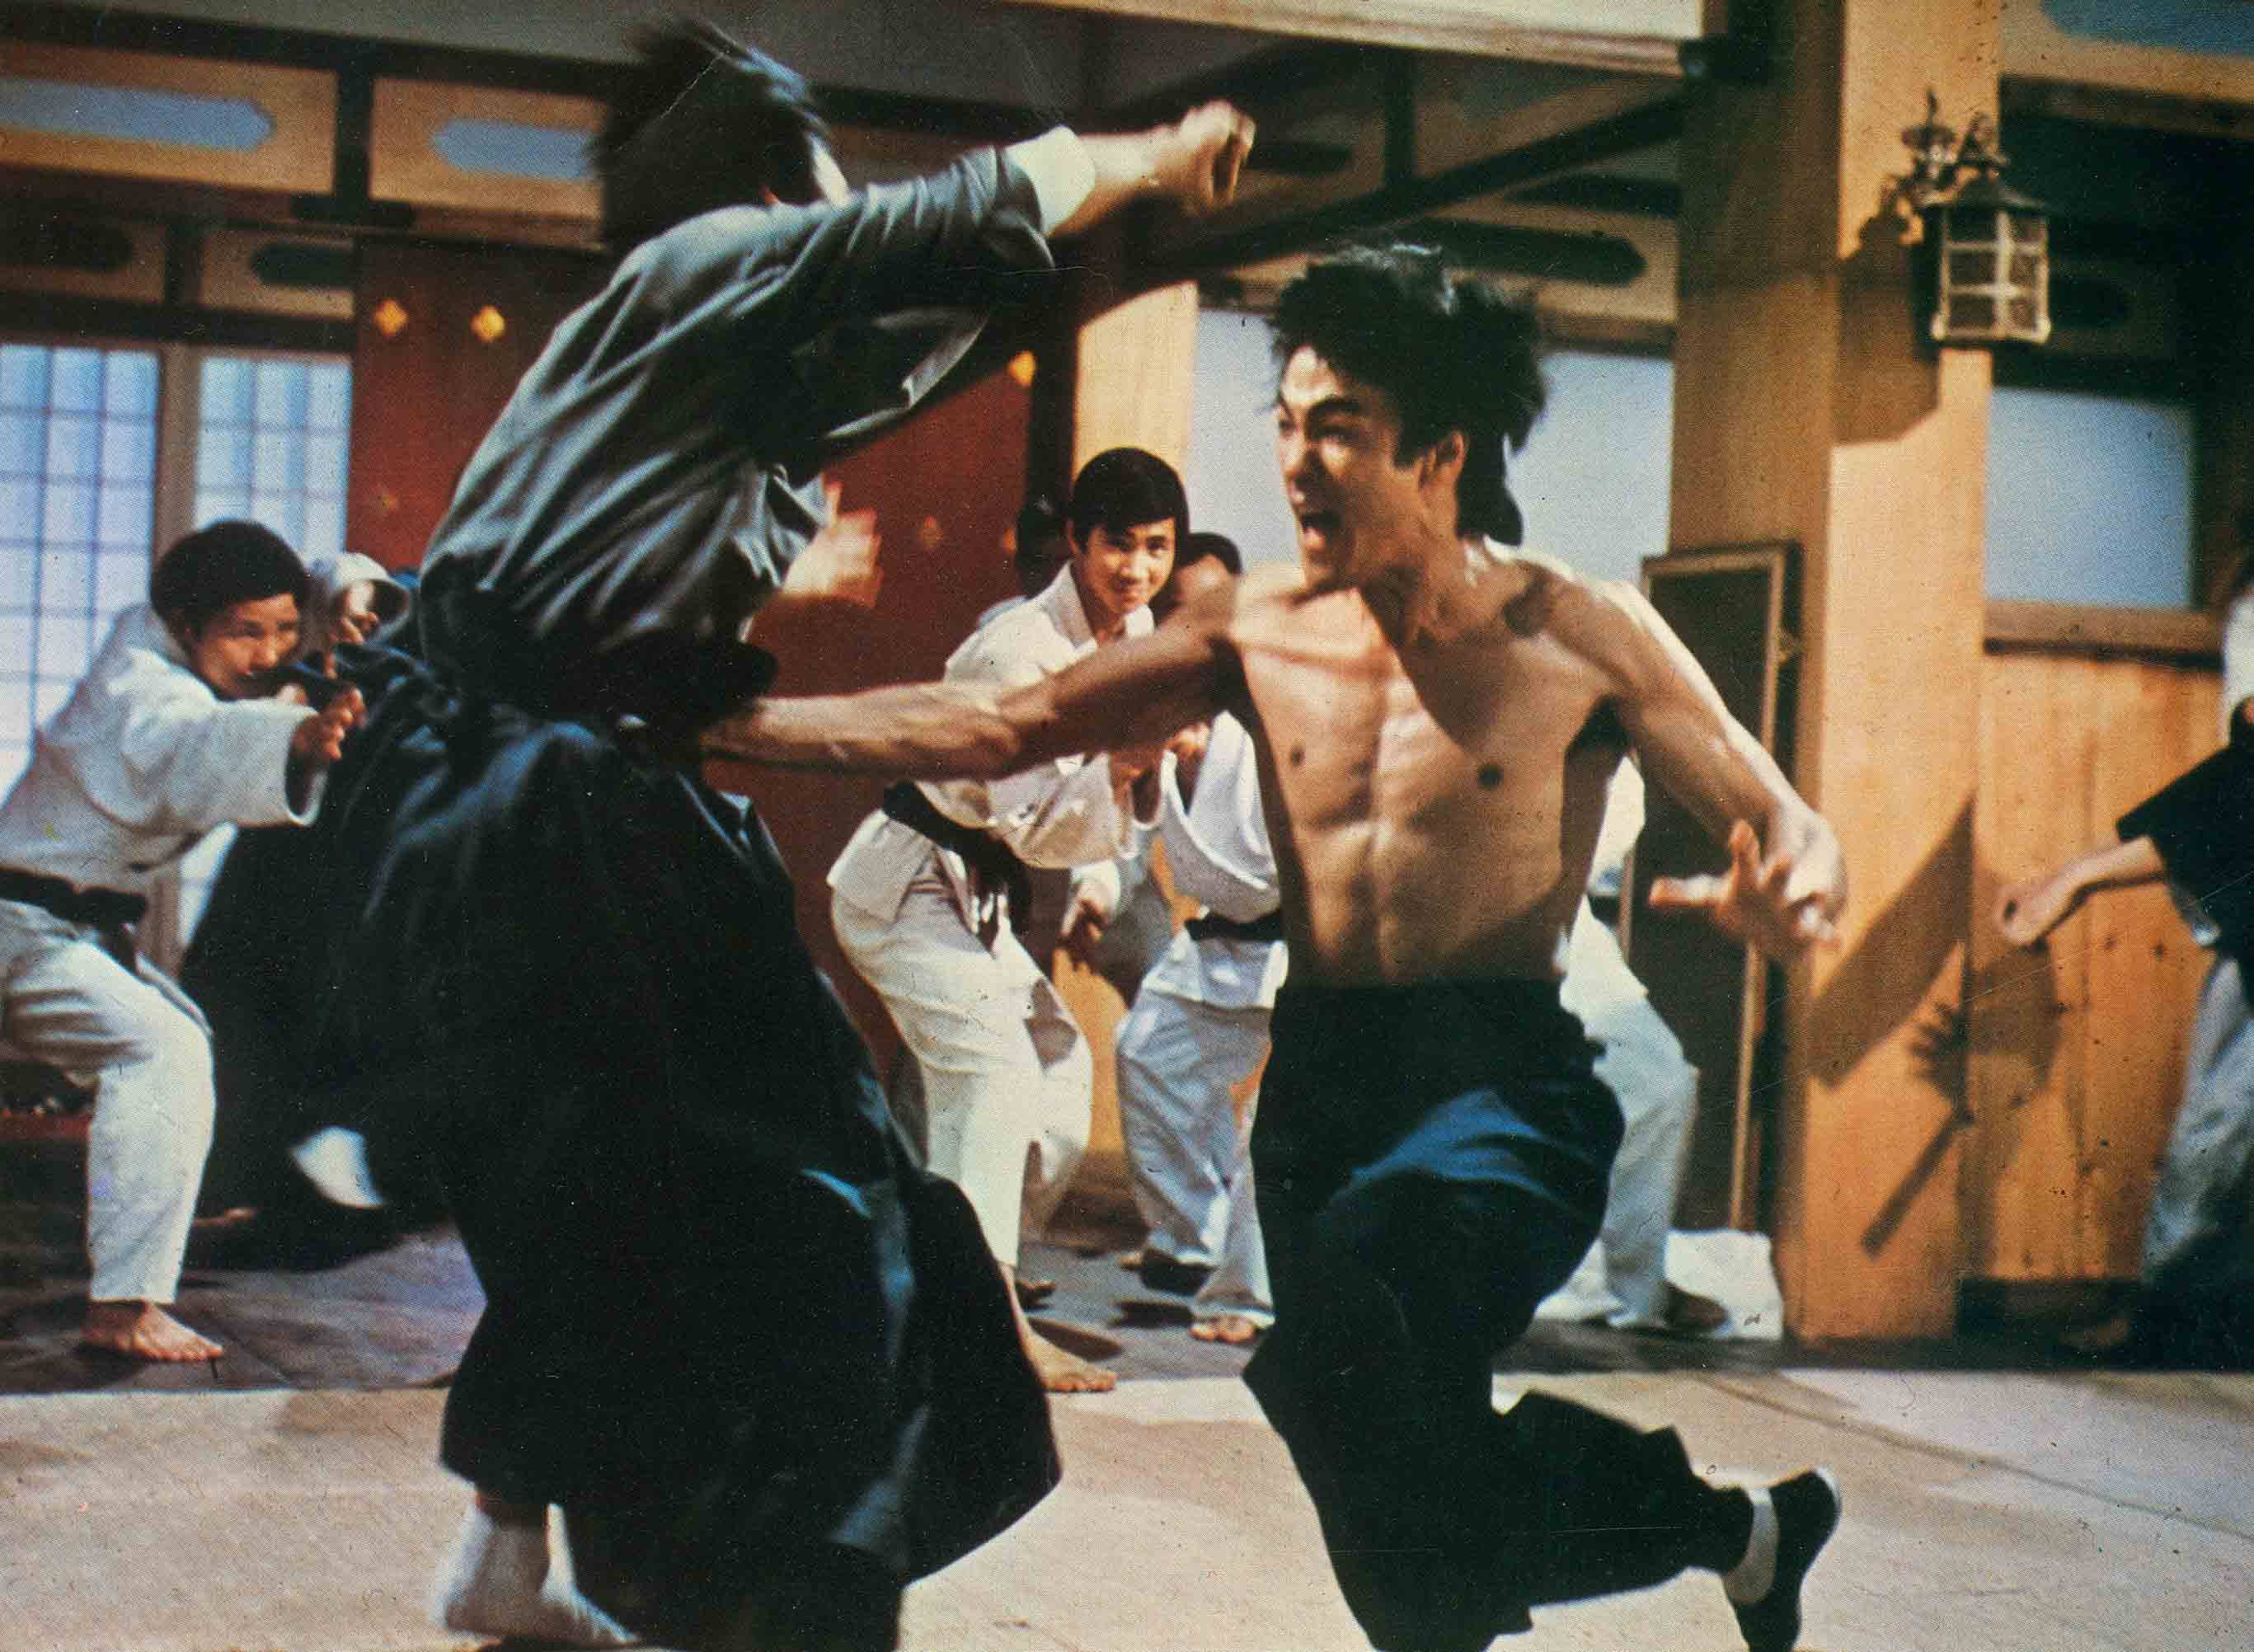 Bruce Lee in Fist of Fury (1972). The movie star popularised Chinese martial arts in the 1970s, but many people still aren’t aware of what defines the different types. We look at four, from Wing Chun to Wudang. Photo: Golden Harvest